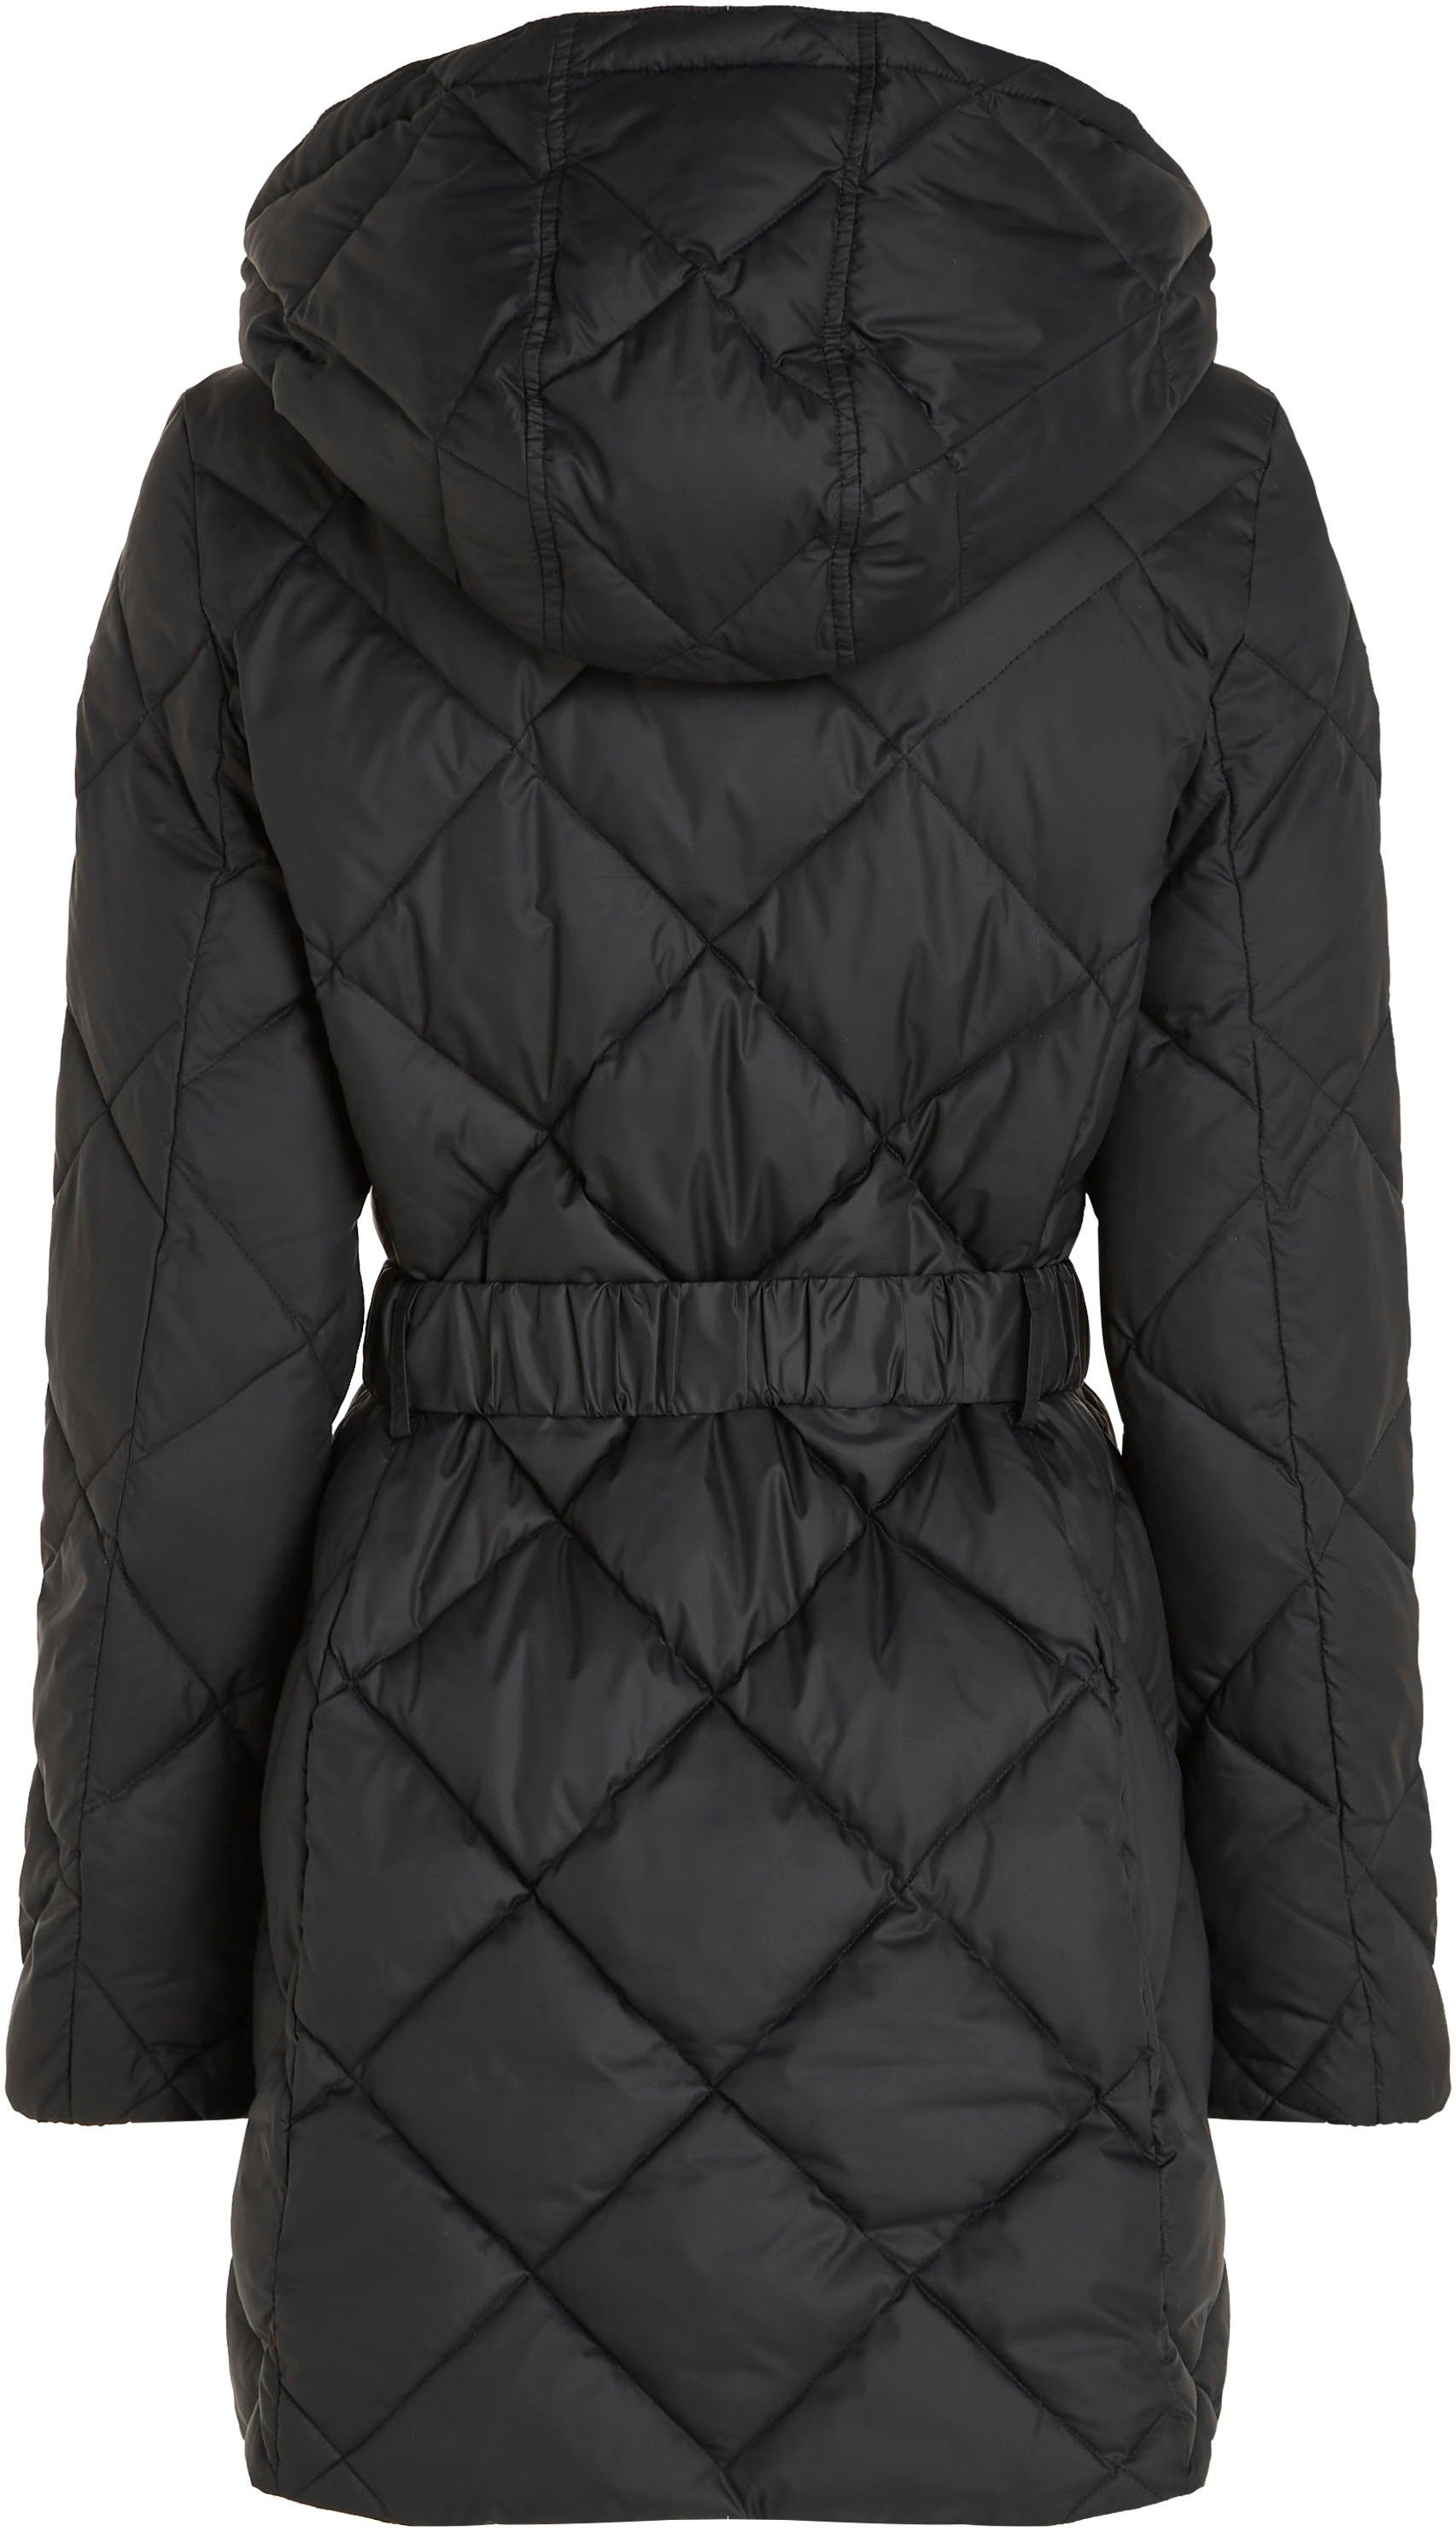 Steppmantel Hilfiger Tommy QUILTED ELEVATED BELTED mit abnehmbarer Kapuze COAT